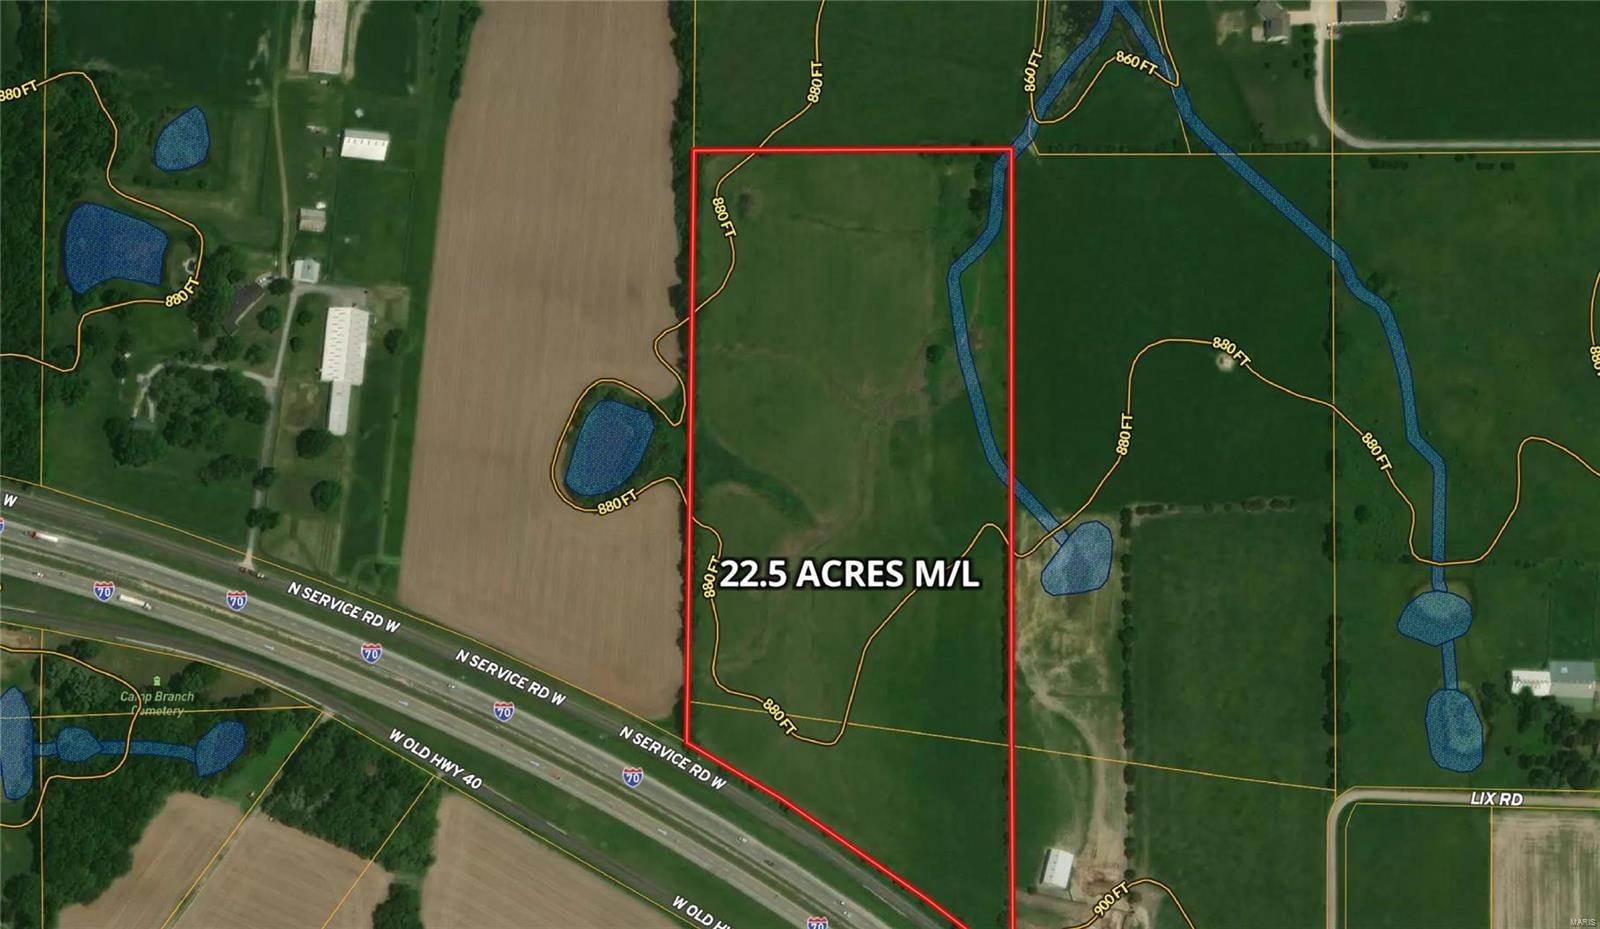 Property for Sale at 22 Nw Service Road Warrenton, Missouri 63383 United States